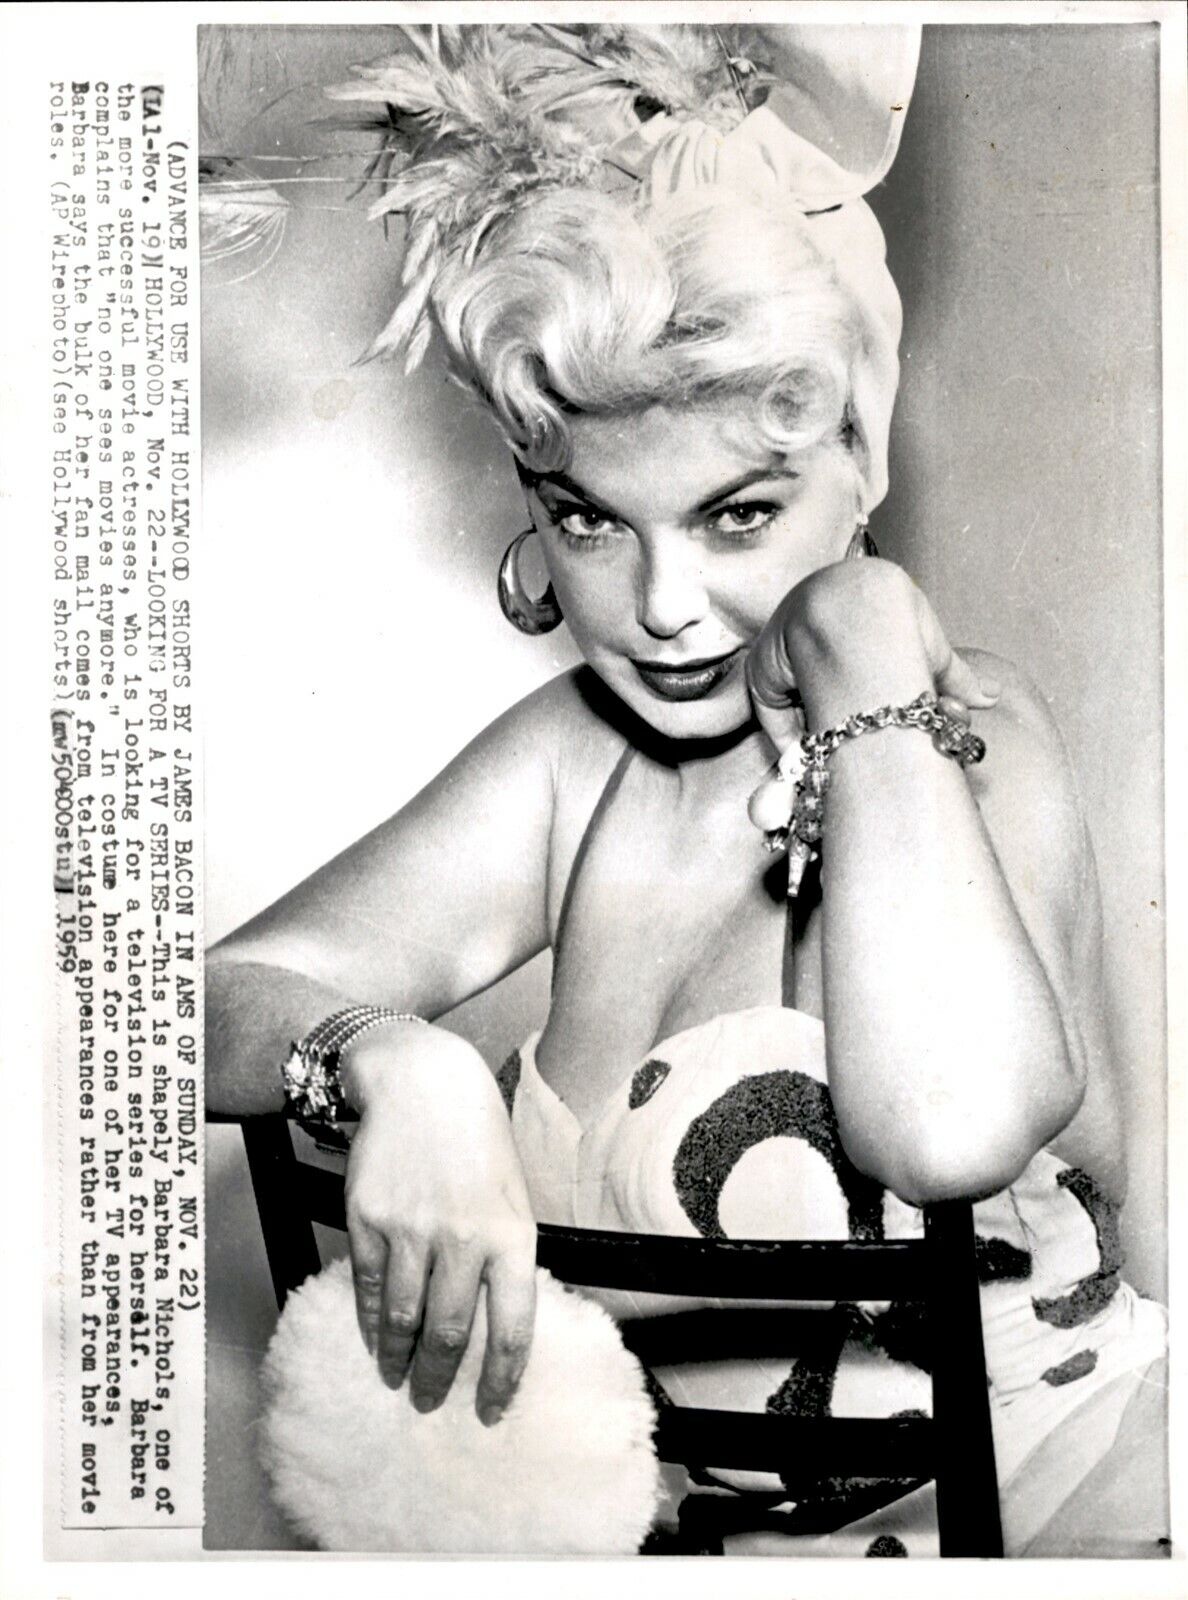 LG915 1959 AP Wire Photo LOOKING FOR A TV SERIES SHAPELY ACTRESS BARBARA NICHOLS